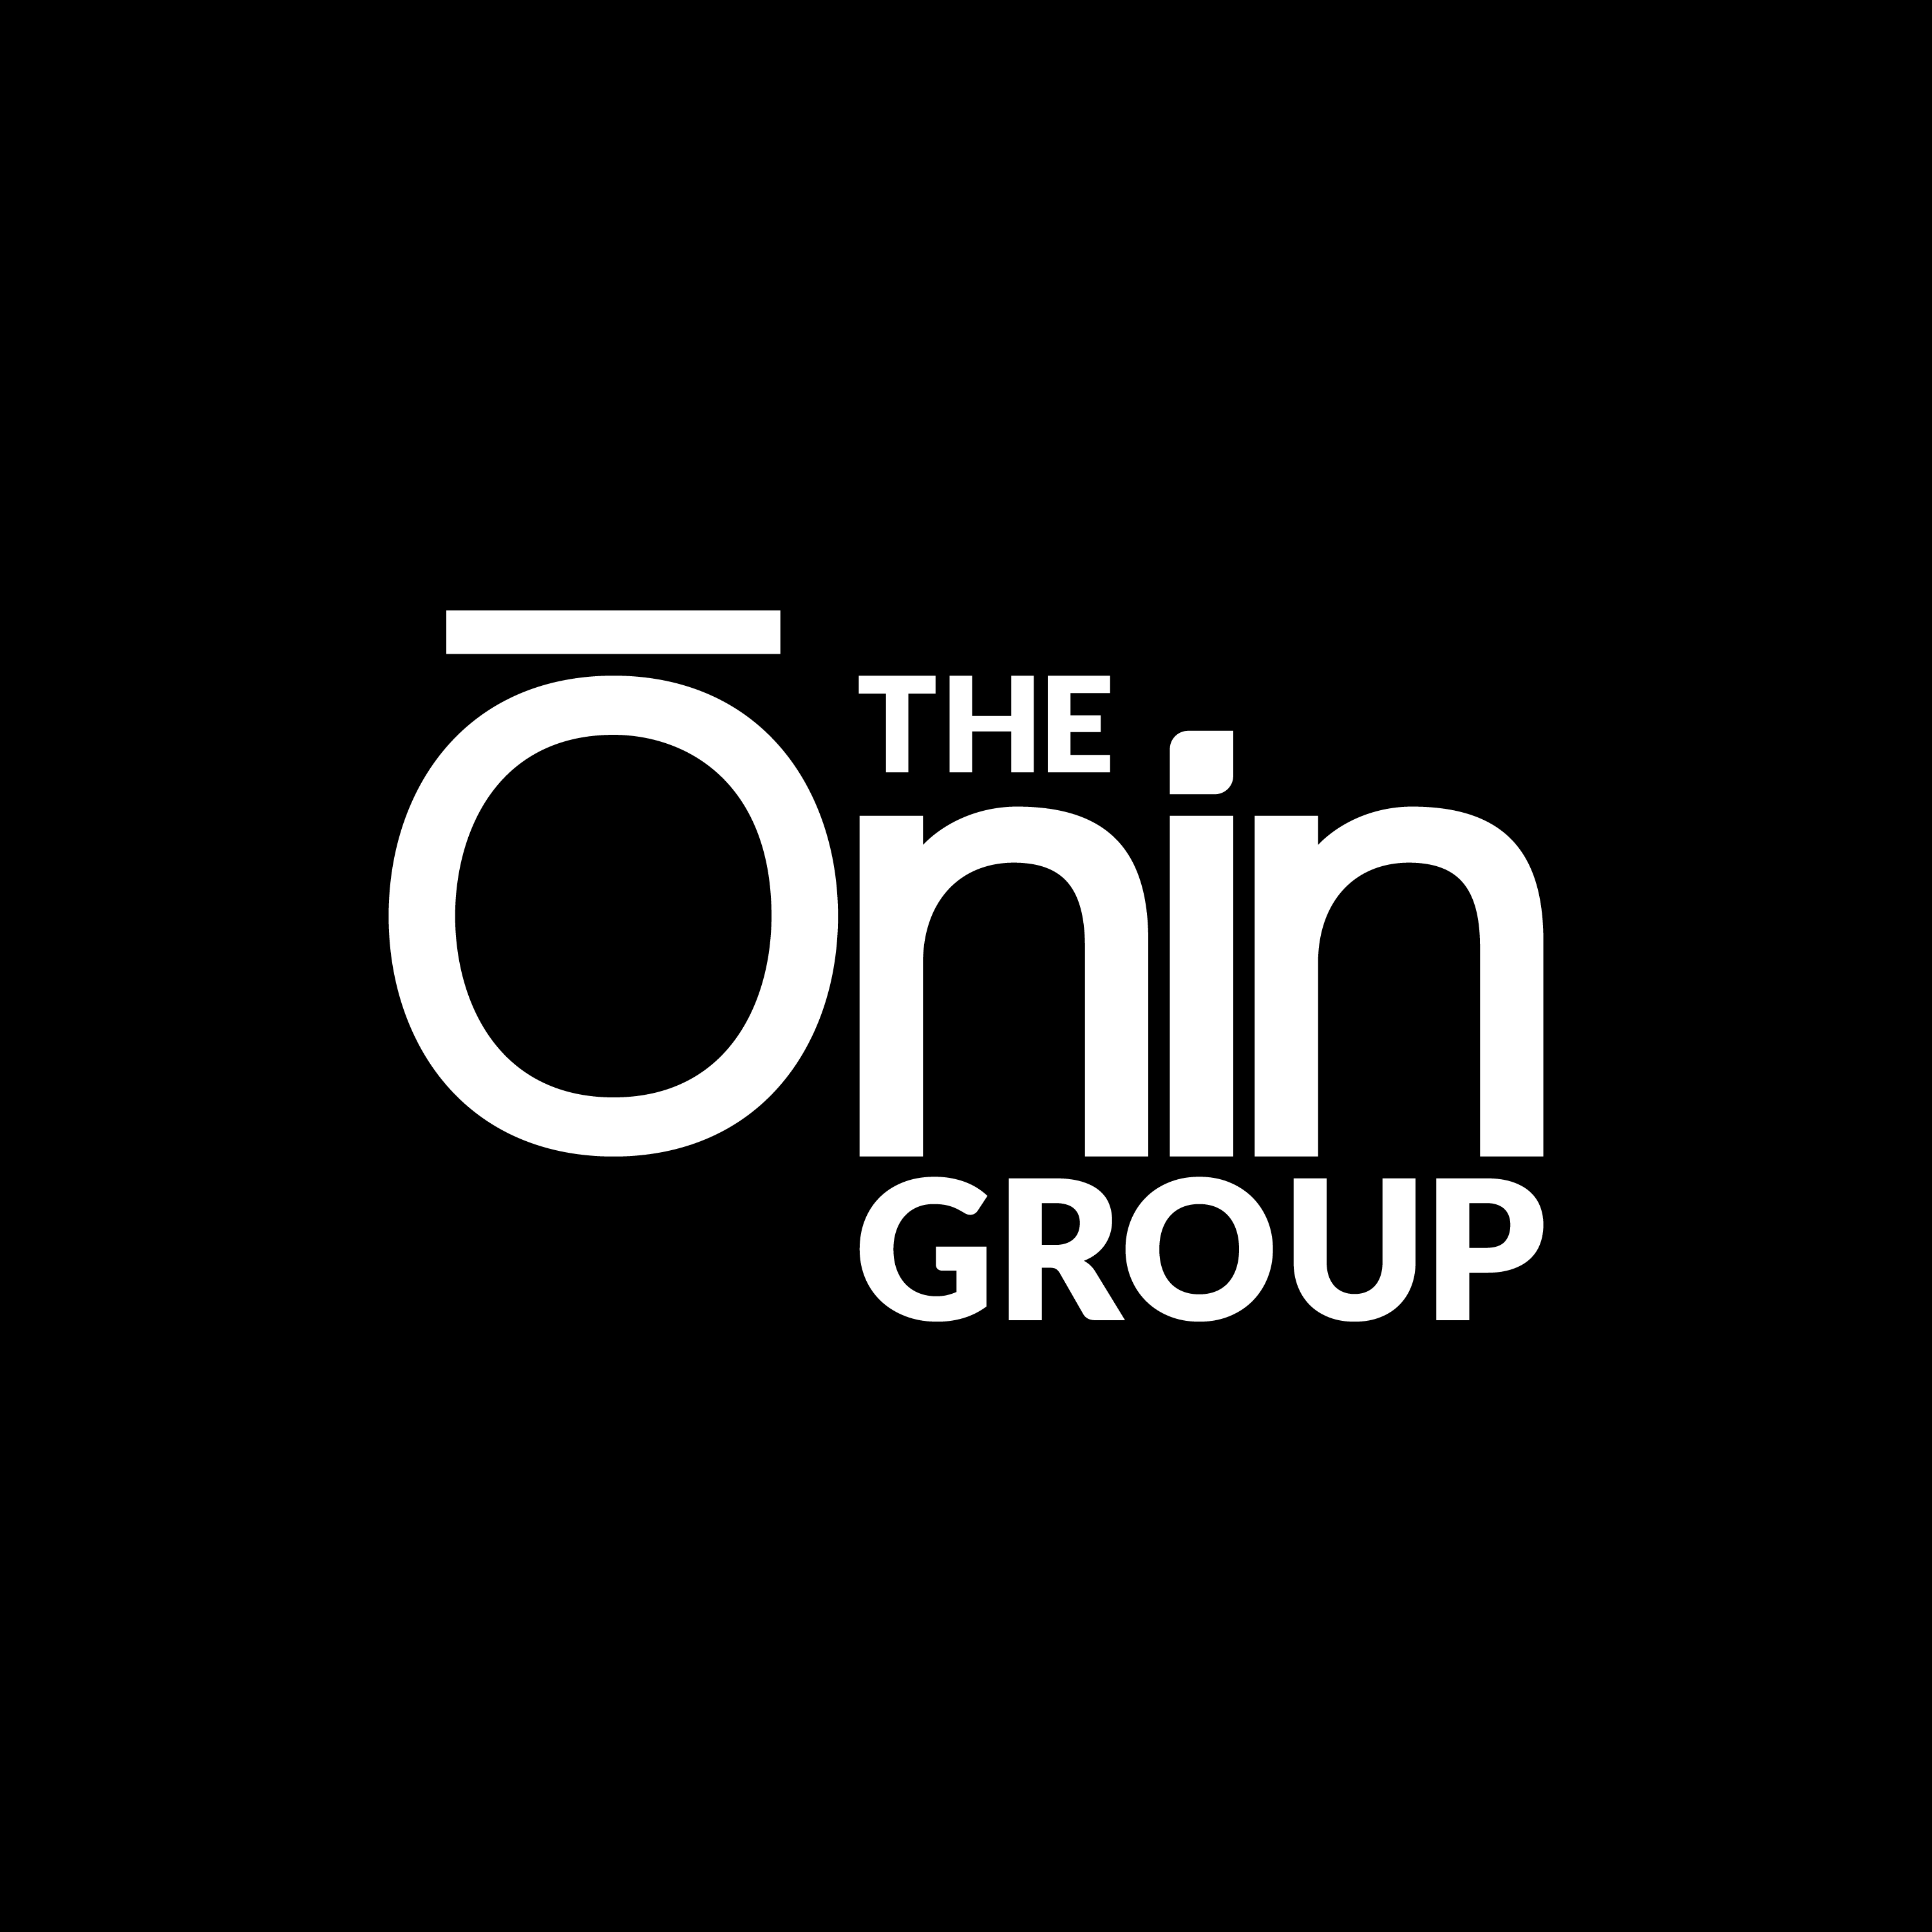 The Onin Group